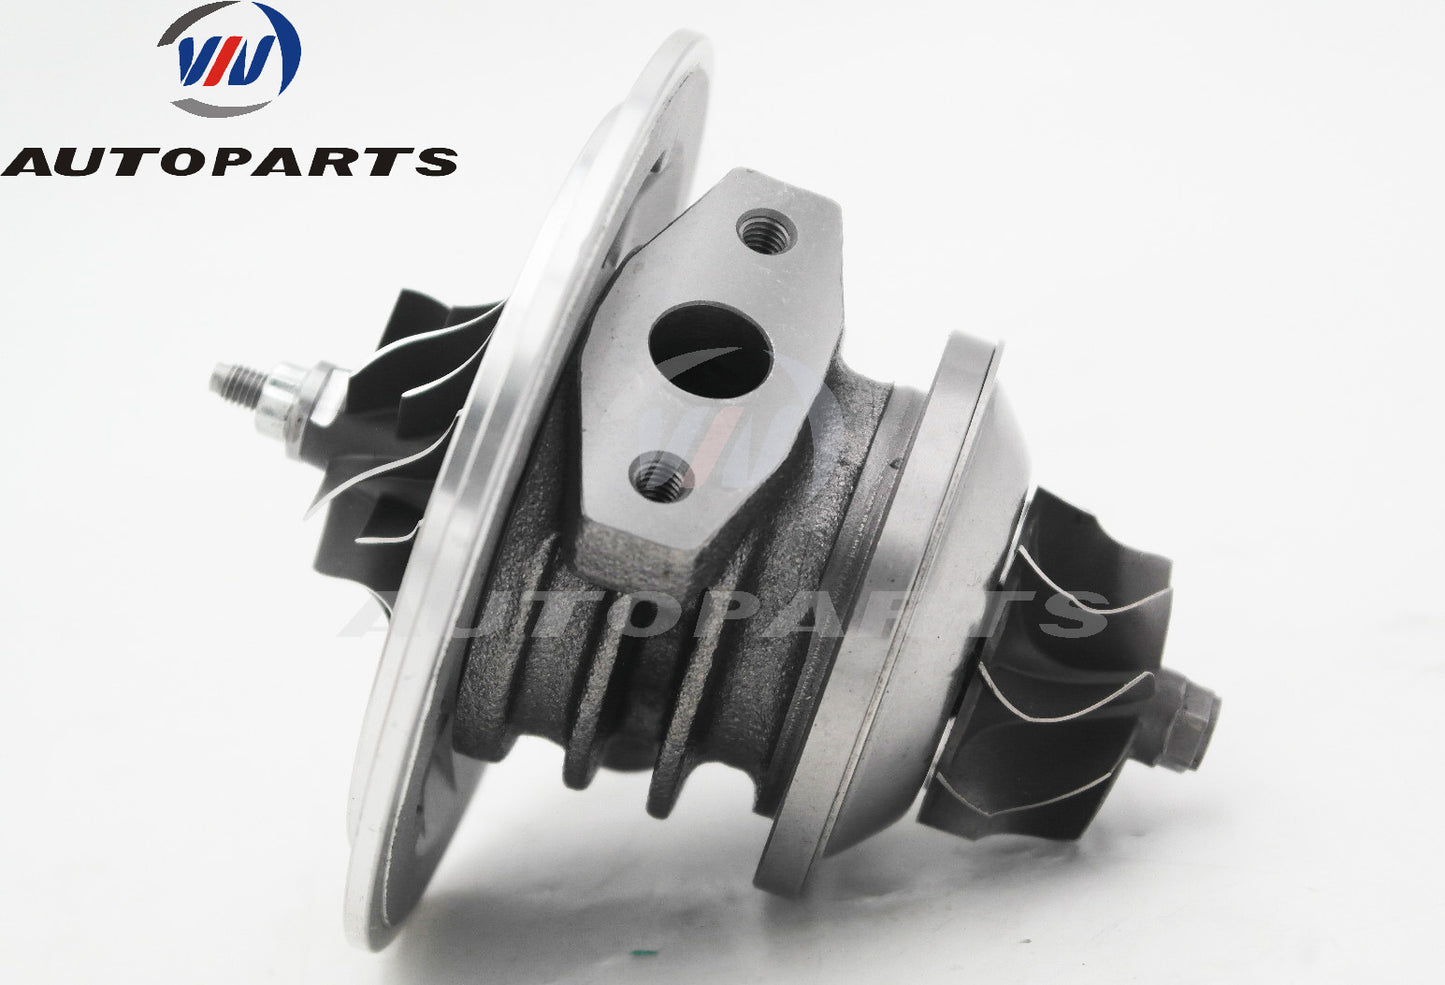 CHRA 433289-0345 for Turbocharger 751768-0001 for Renault Volvo Mitsubishi Opel 1.9L Diesel Engine